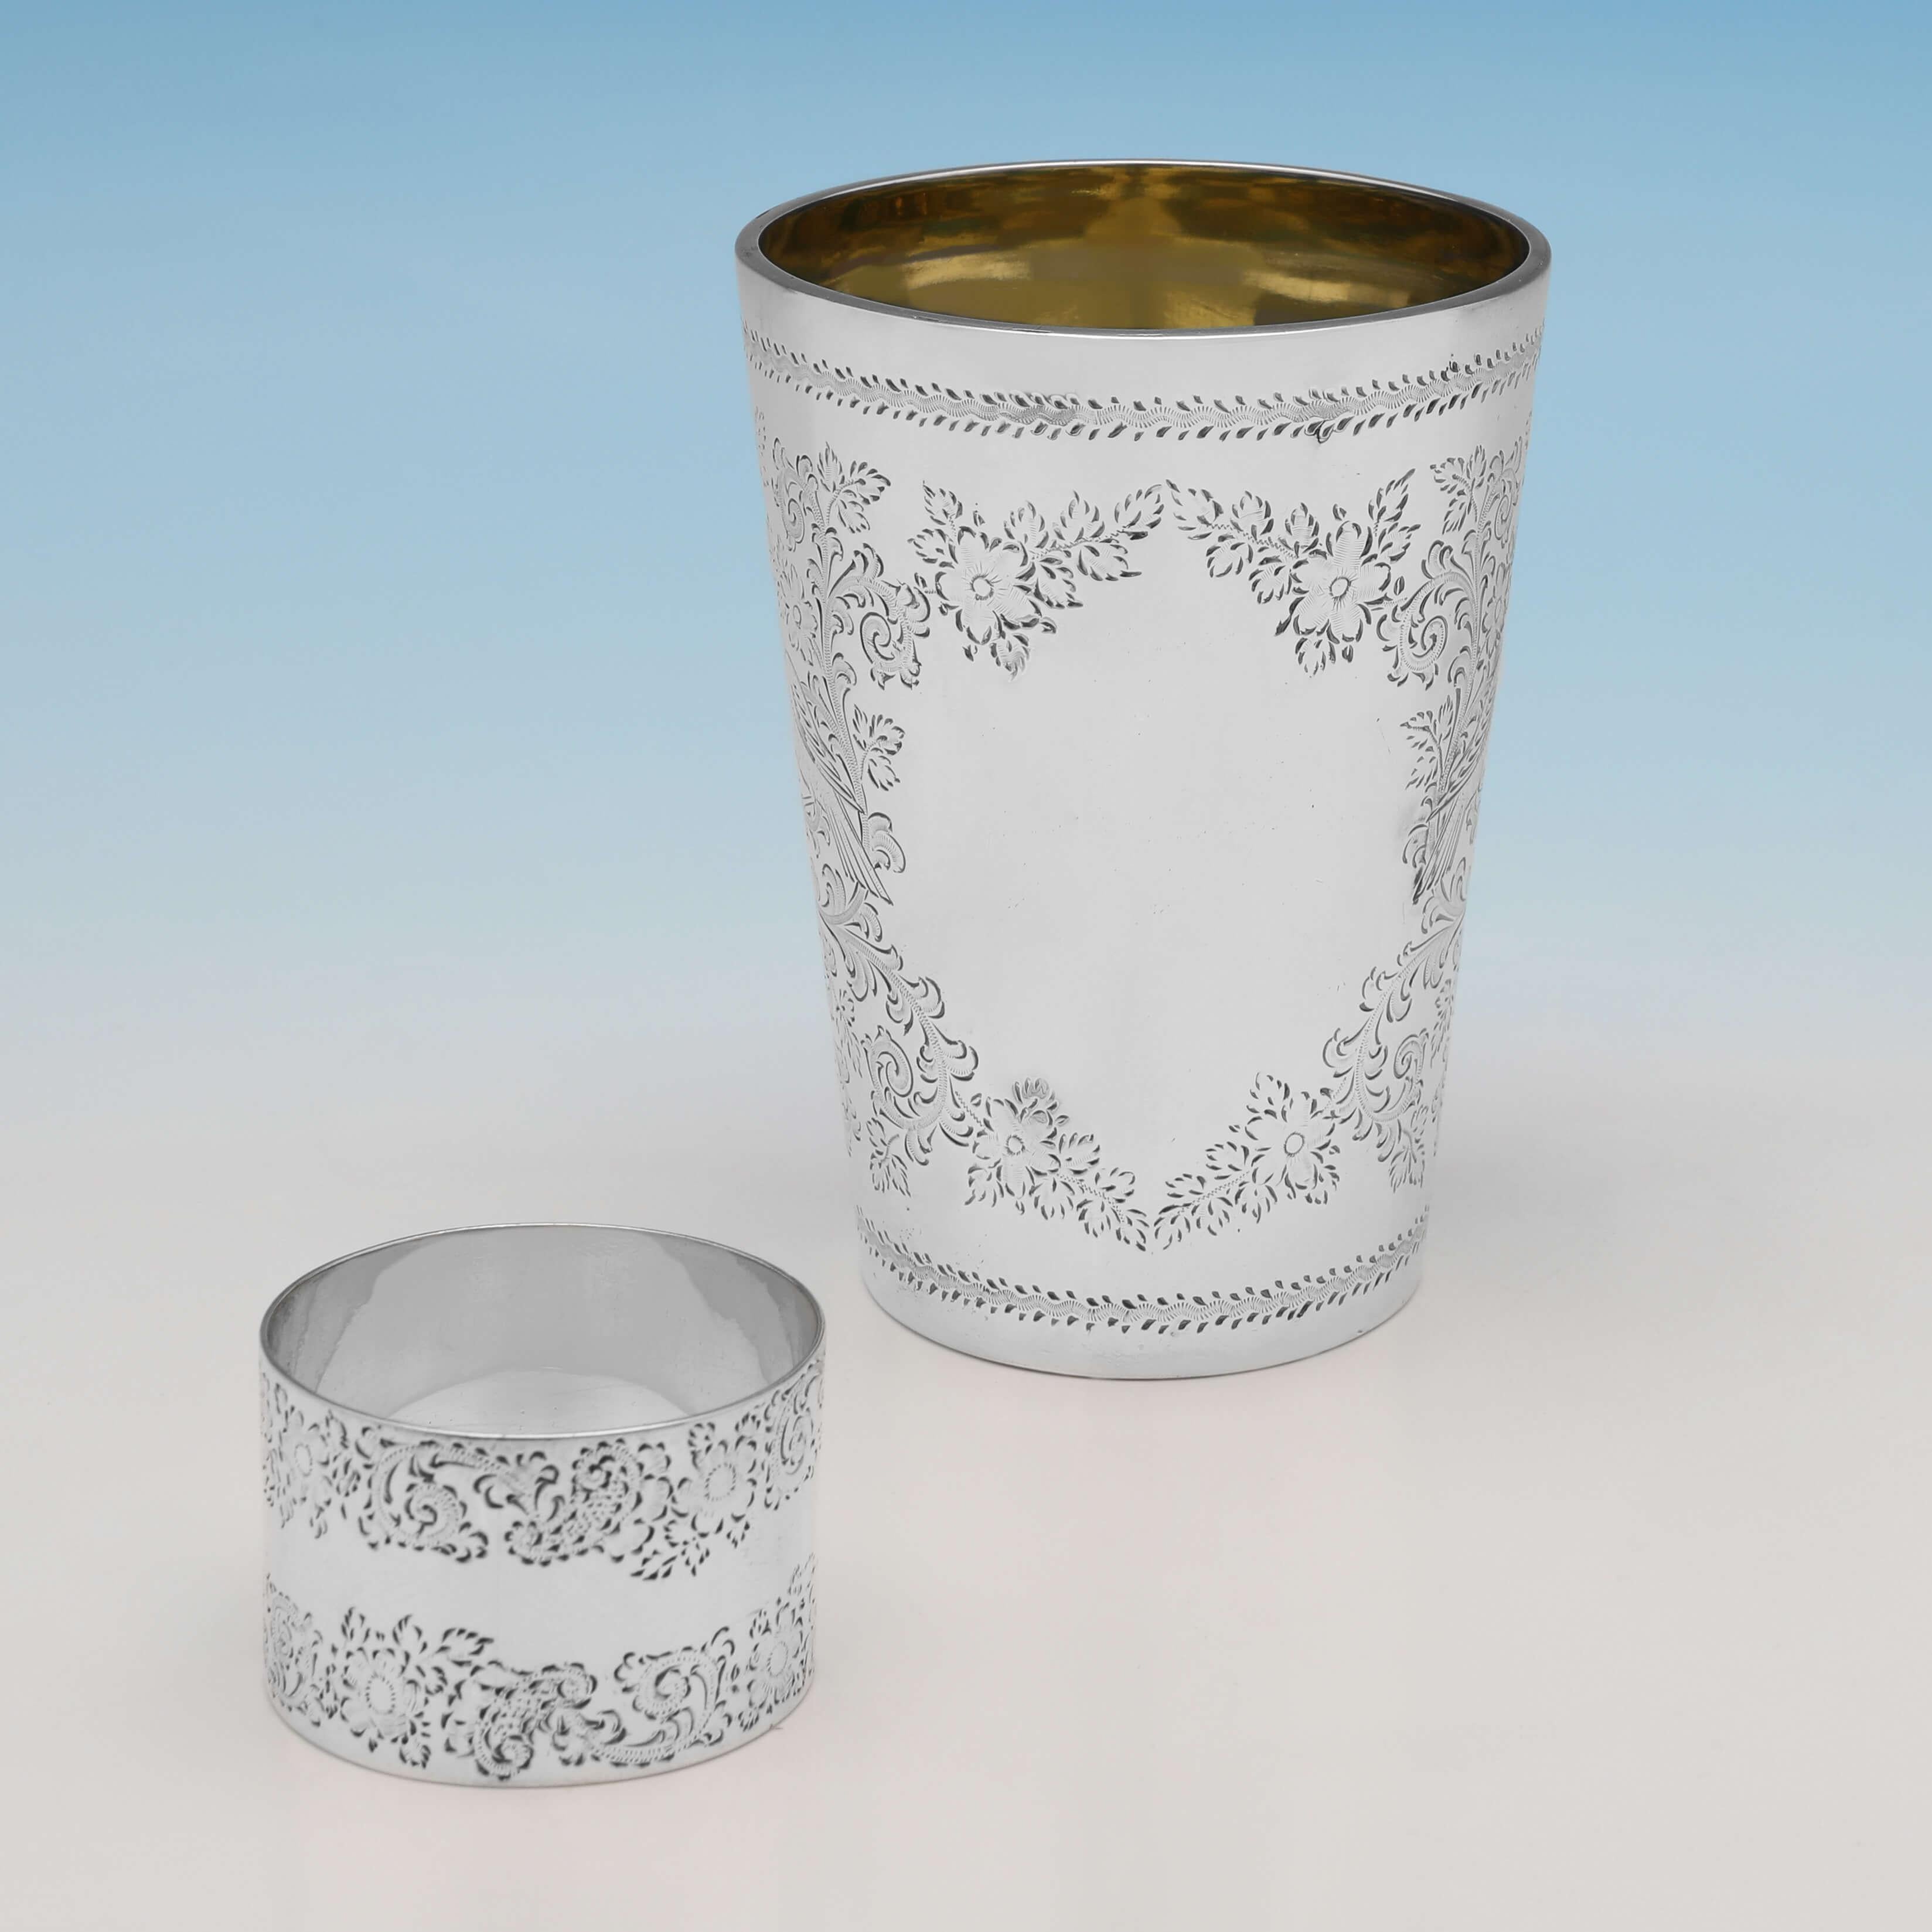 Aesthetic Movement Aesthetic Design, Victorian Antique Sterling Silver Childs Set, 1890/1900